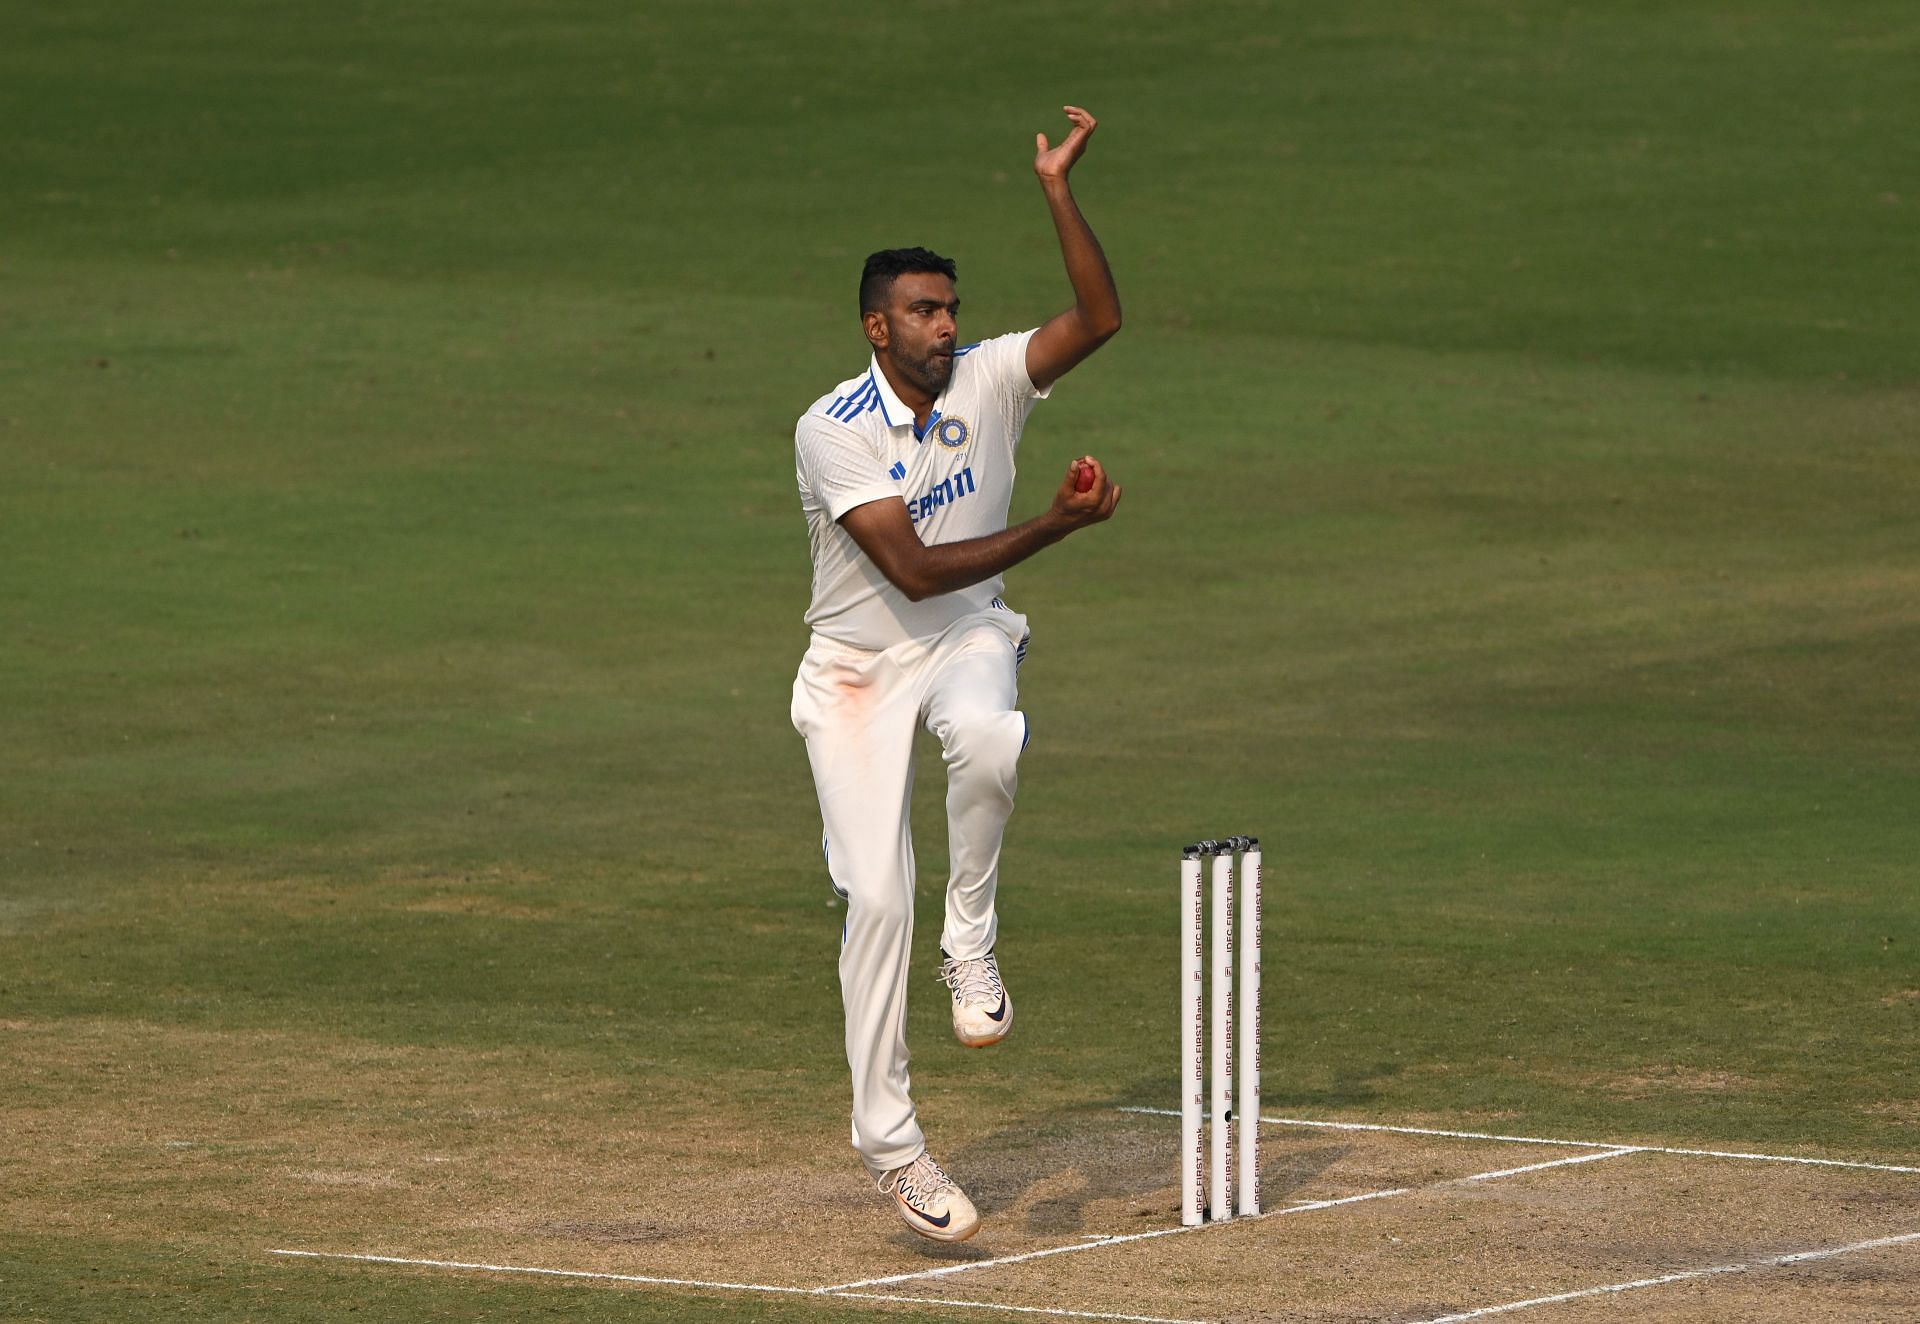 Ravichandran Ashwin is known for frequently adding new deliveries to his arsenal. [P/C: Getty]